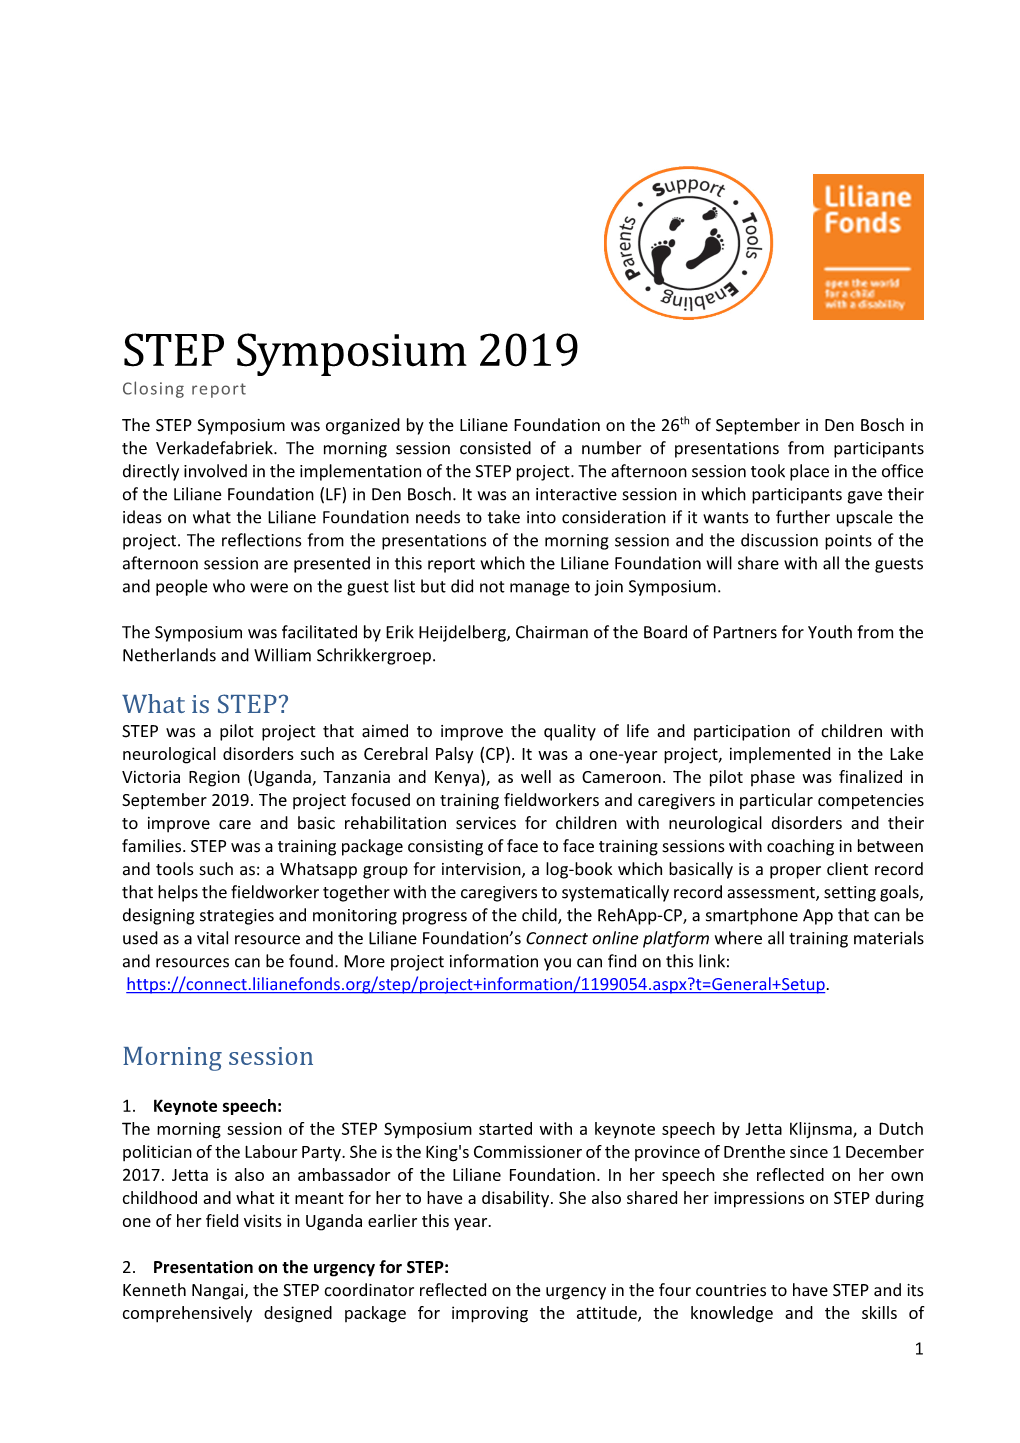 STEP Symposium 2019 Closing Report the STEP Symposium Was Organized by the Liliane Foundation on the 26 Th of September in Den Bosch in the Verkadefabriek